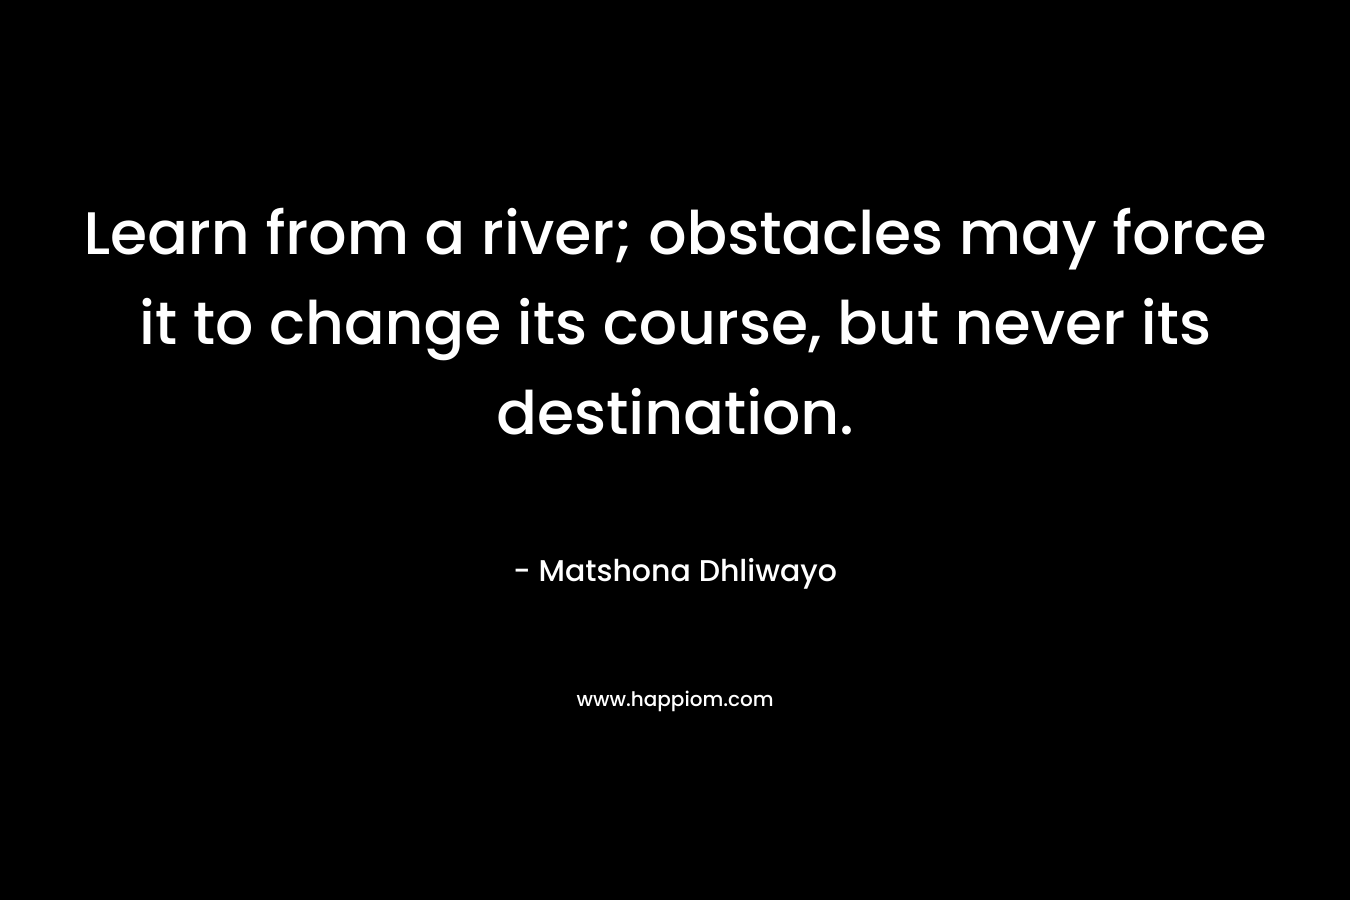 Learn from a river; obstacles may force it to change its course, but never its destination.